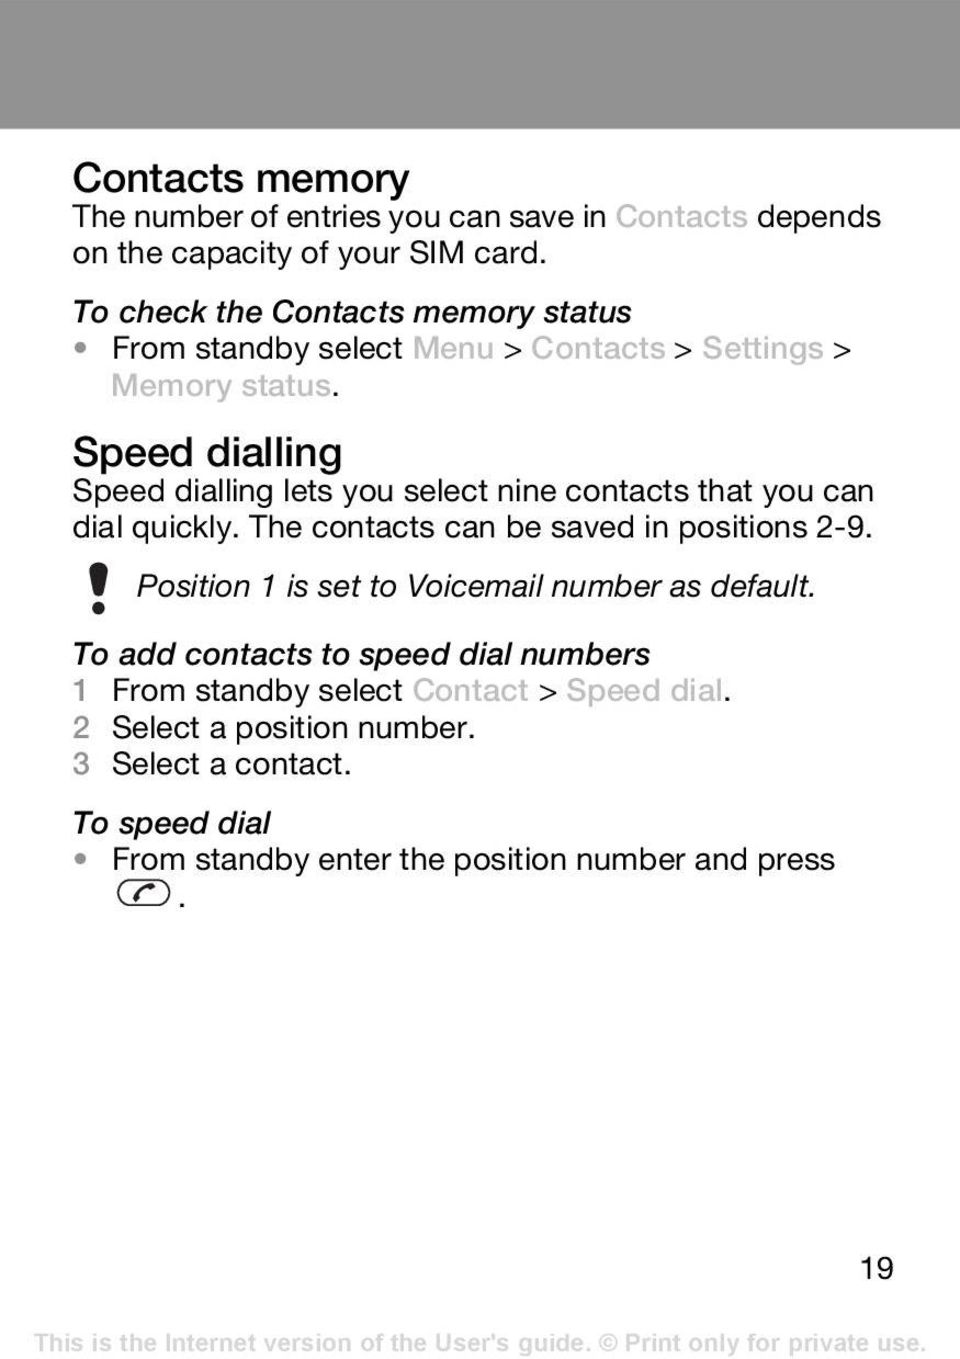 Speed dialling Speed dialling lets you select nine contacts that you can dial quickly. The contacts can be saved in positions 2-9.